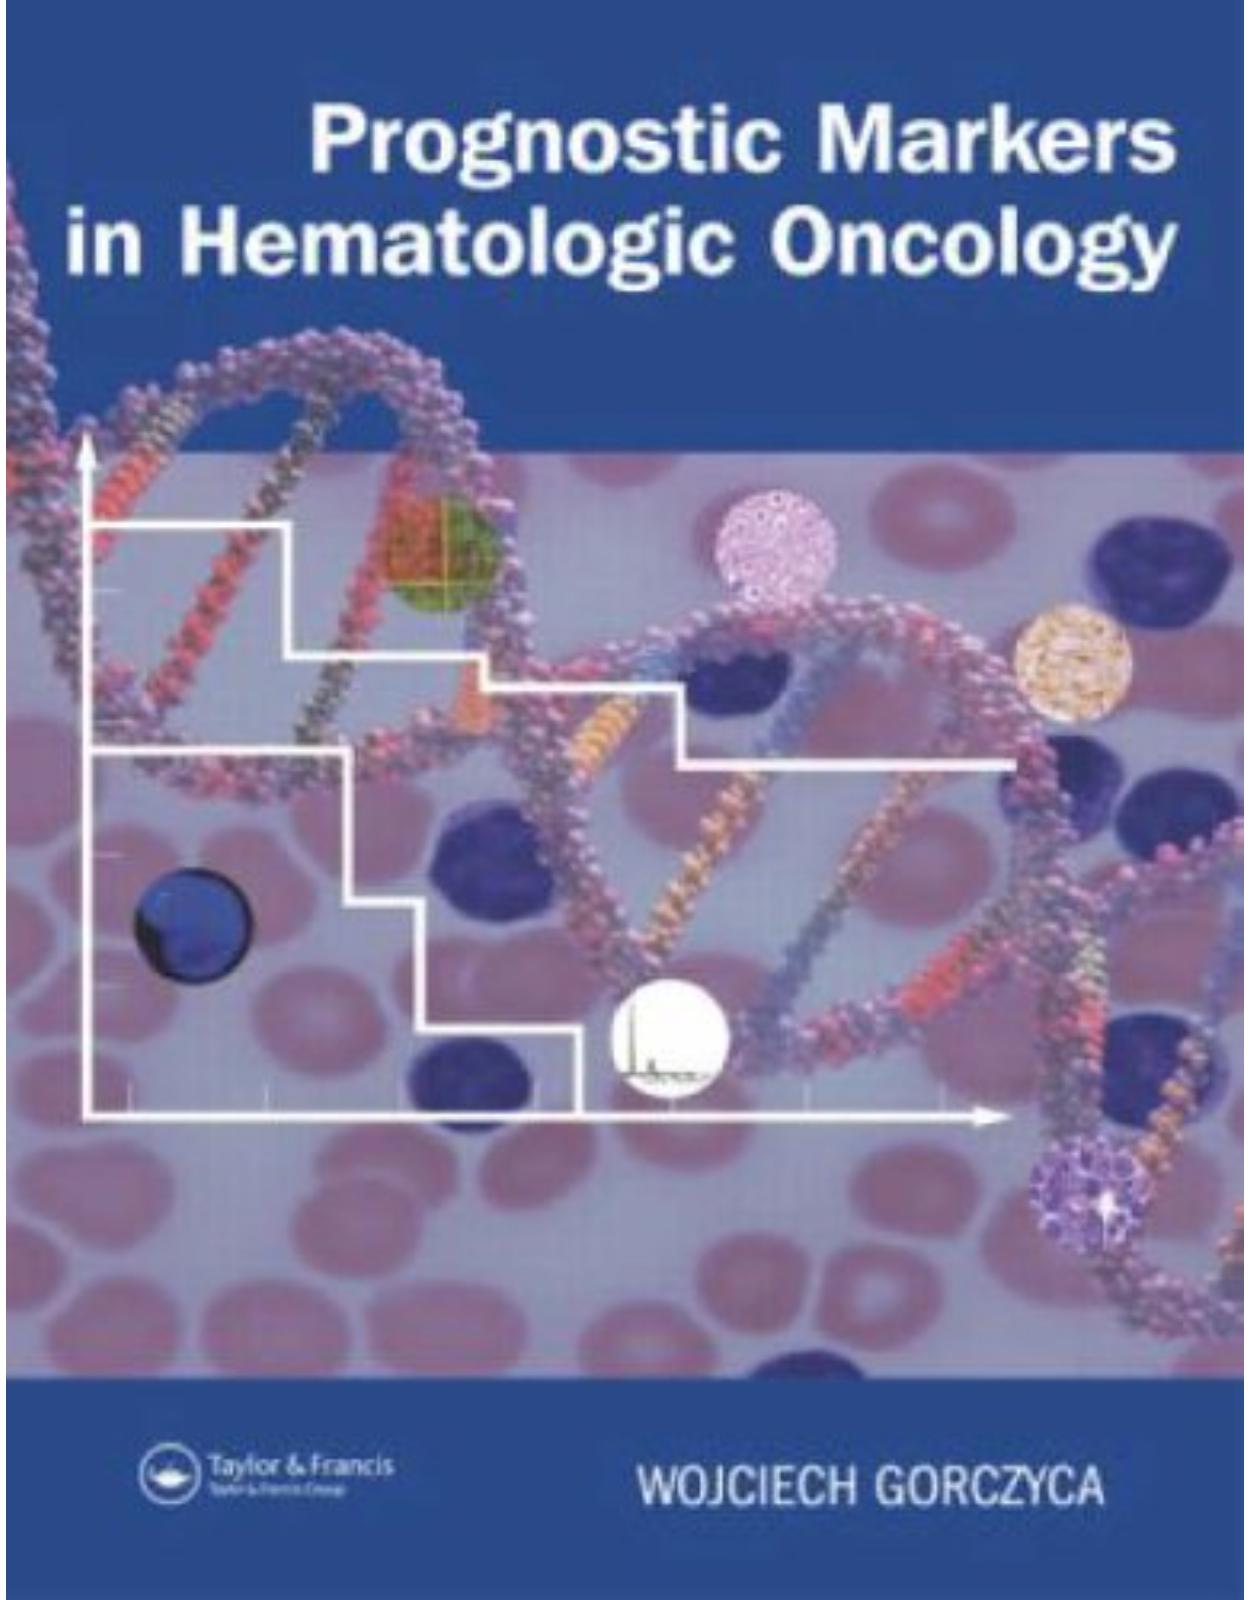 Prognostic Markers in Hematologic Oncology